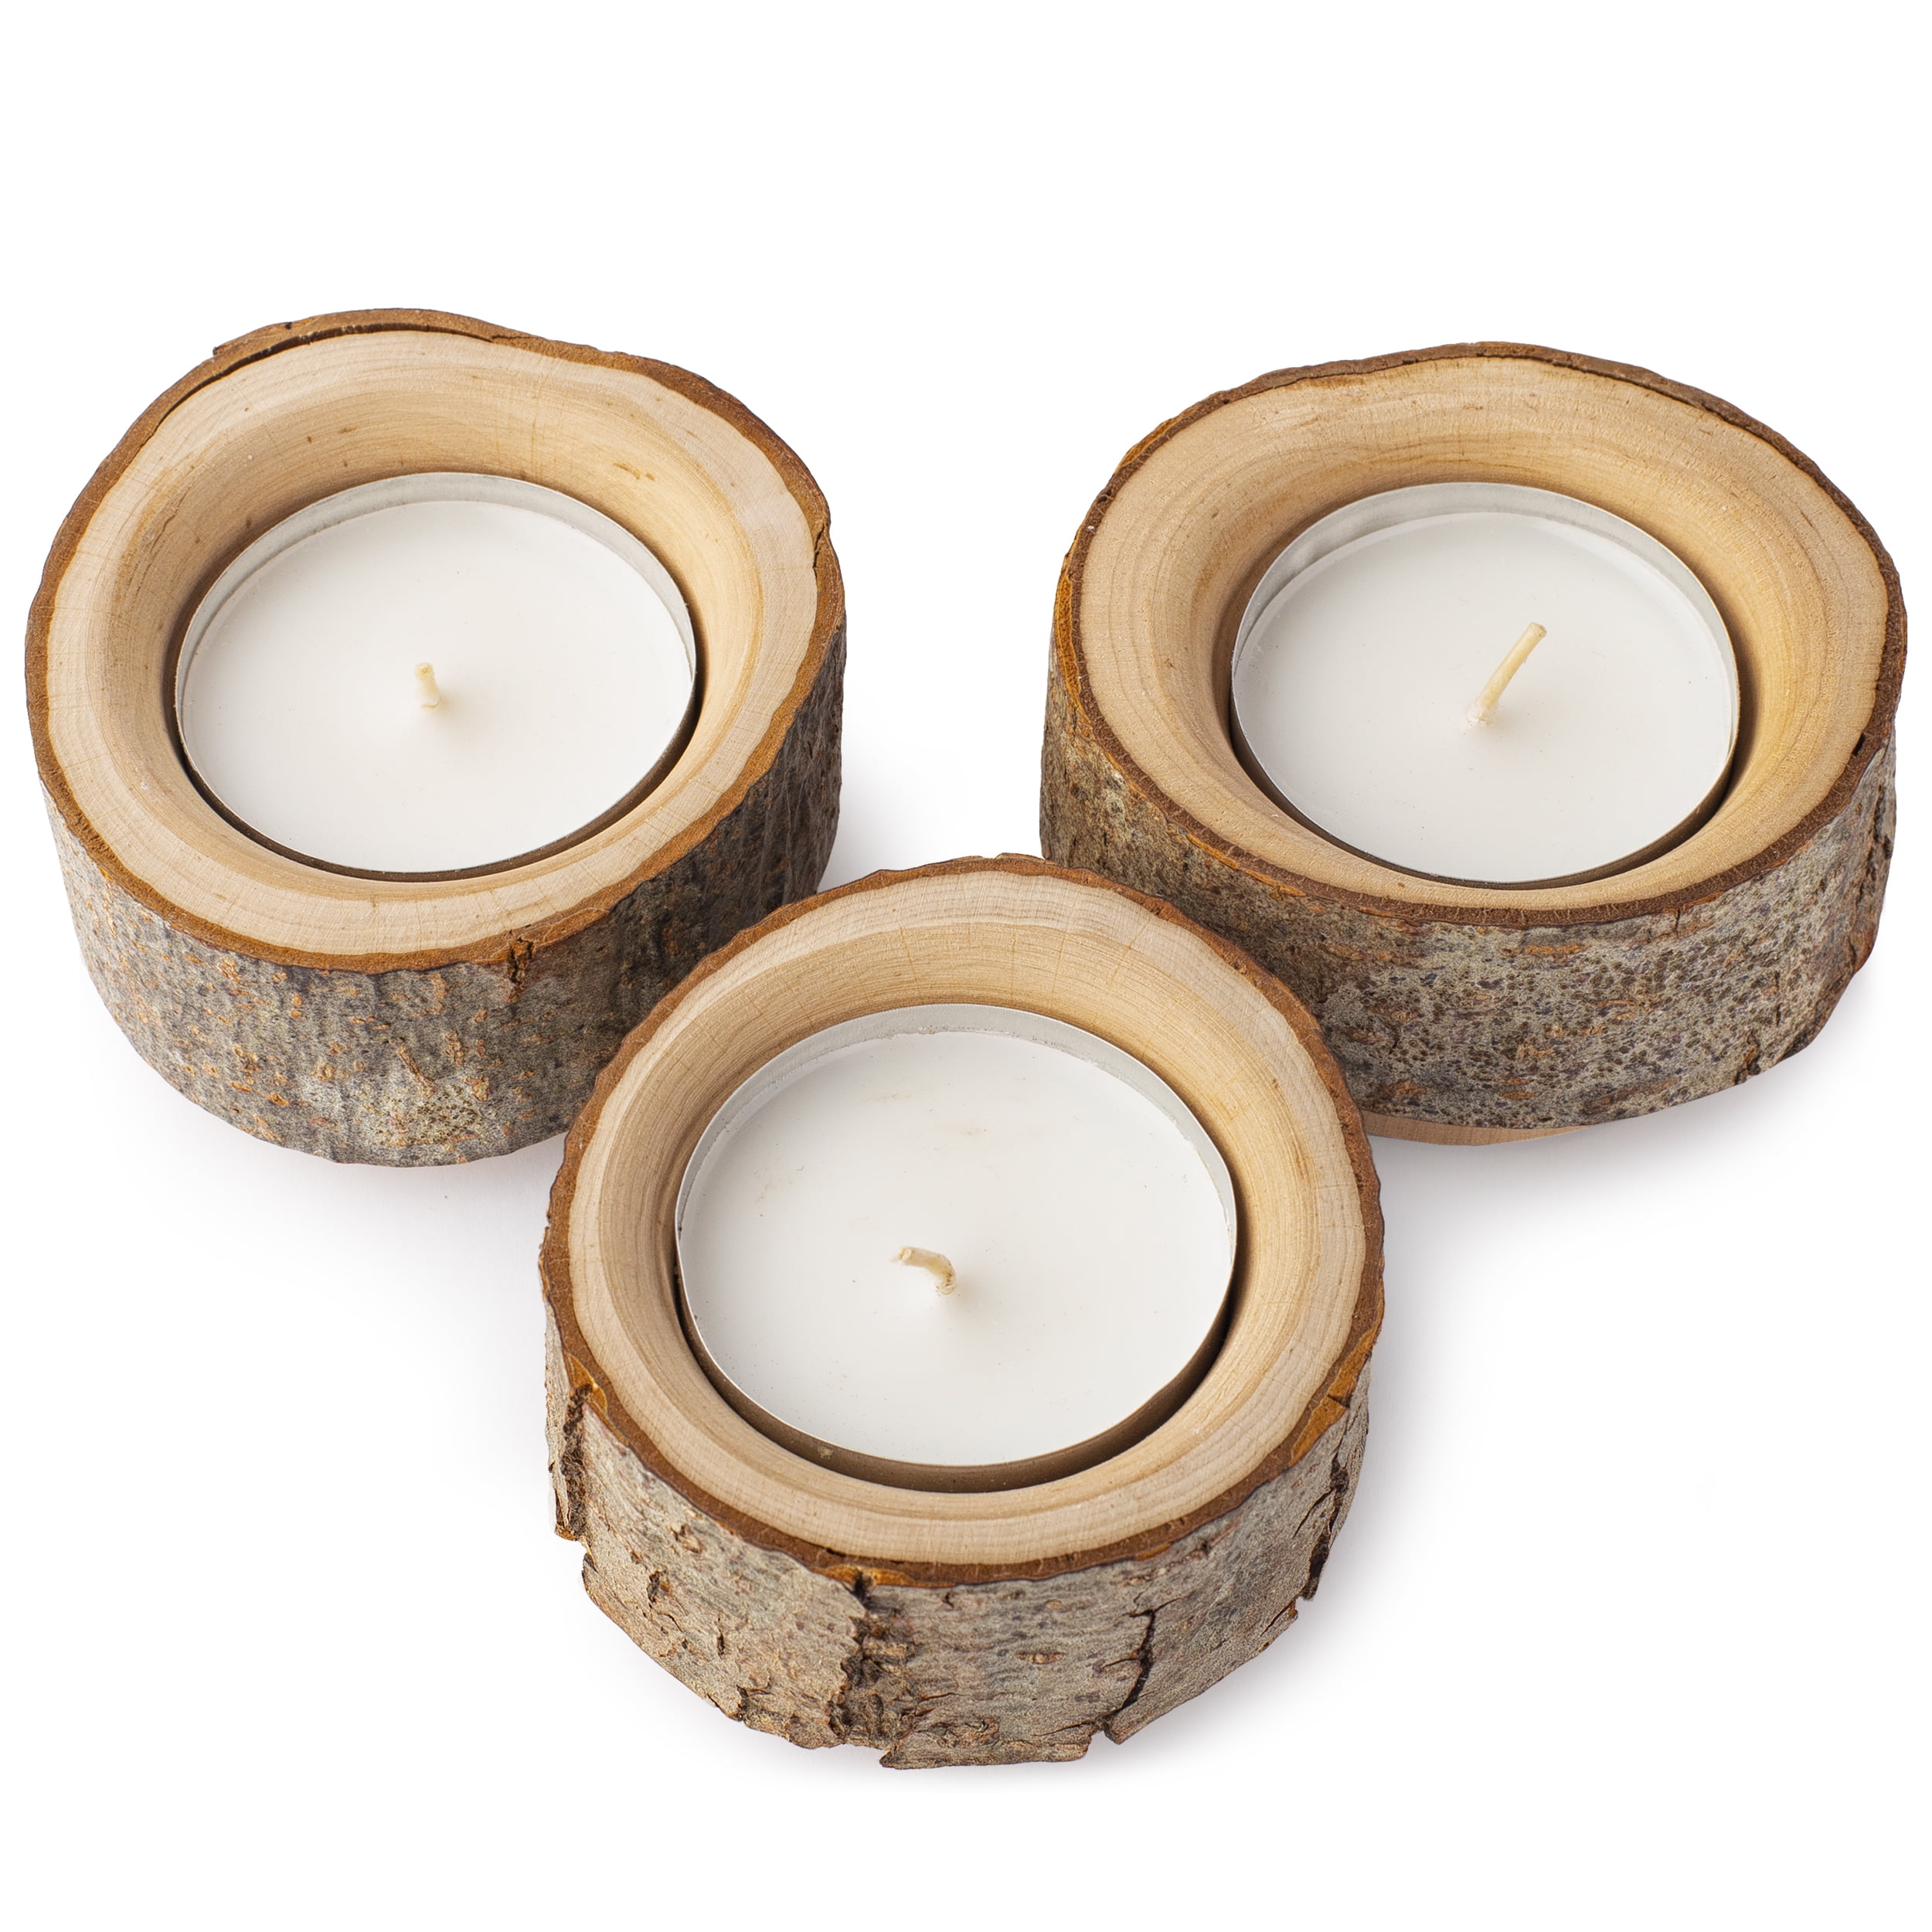 TERRA HOME Candle Holder Centerpiece Coffee Table Decor Decorative Candle Centerpiece with Rustic Wooden Tray and Metal Plate Candle Holders Vintage Look Centerpieces for Dining Room Table 